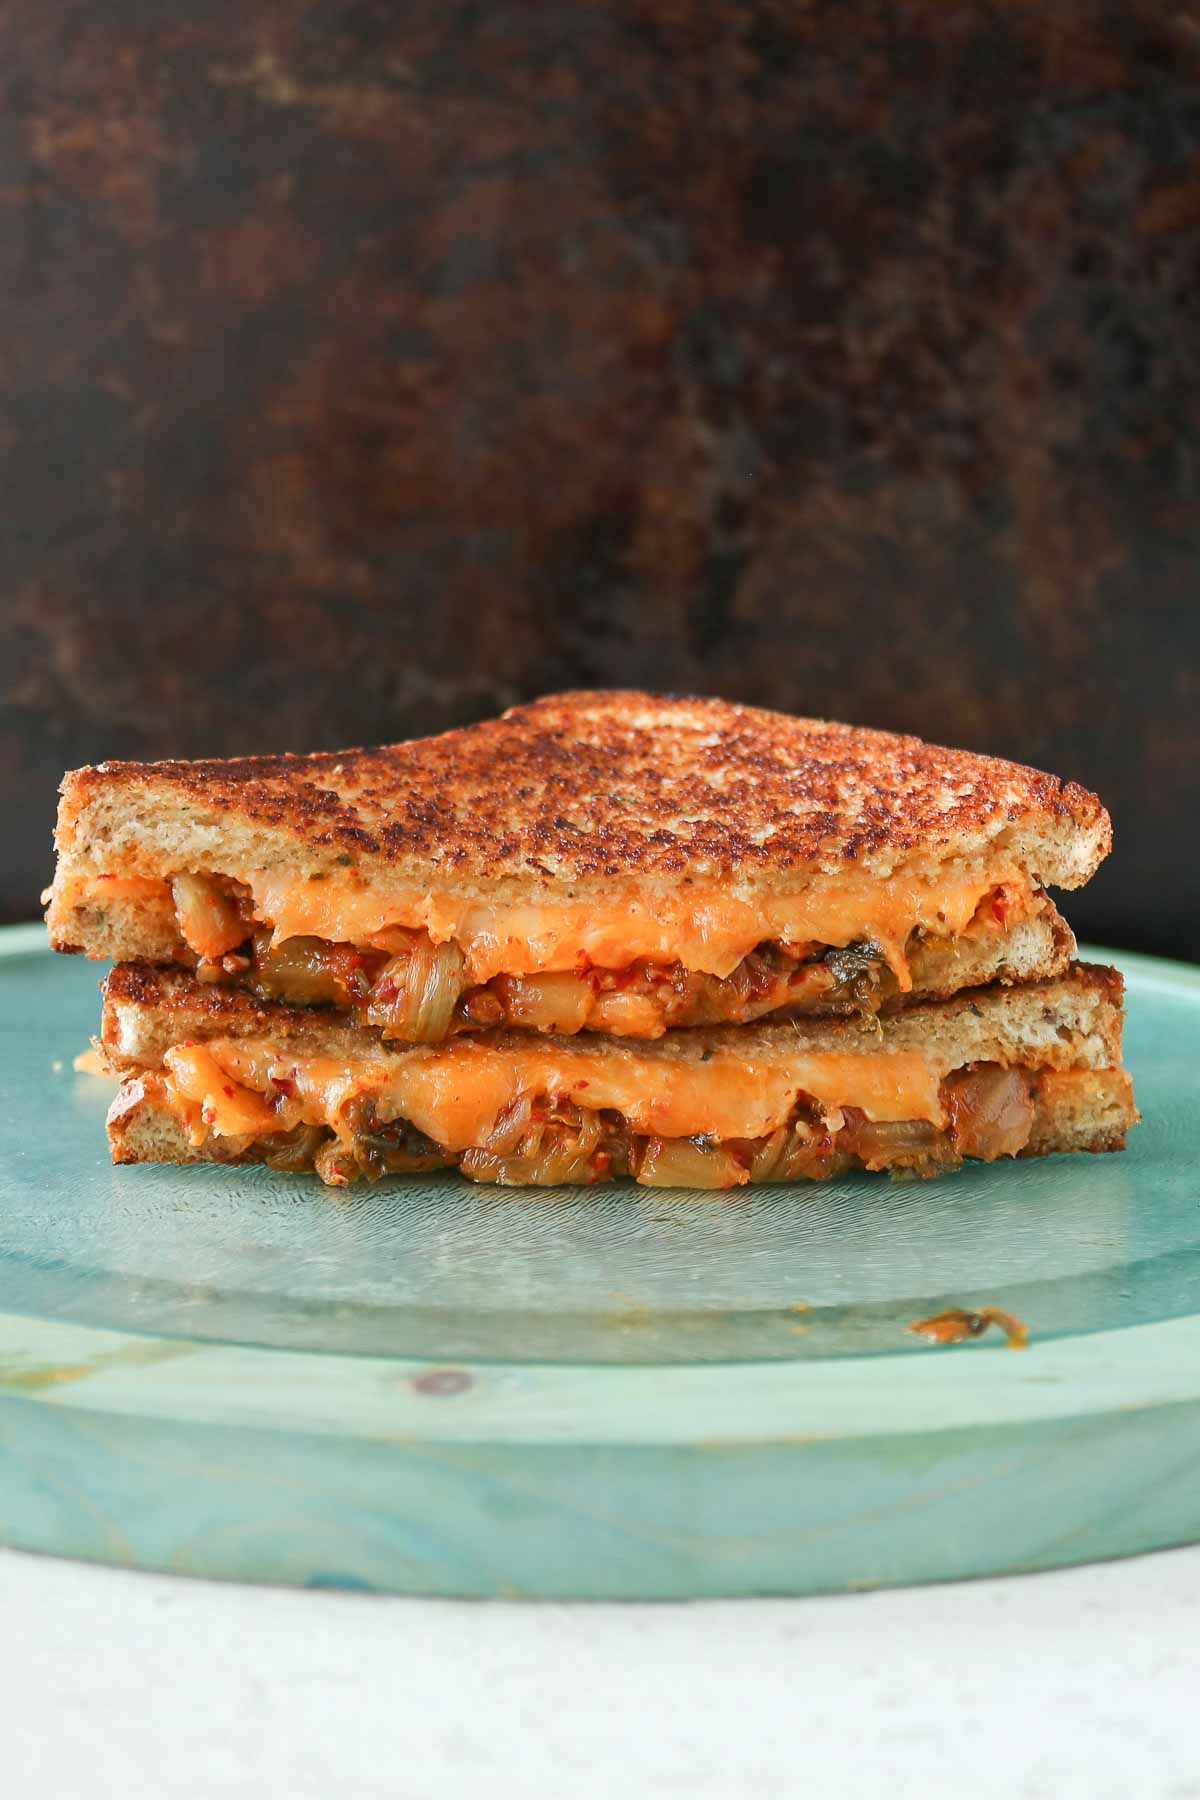 Stack of two halves of a kimchi grilled cheese sandwich.